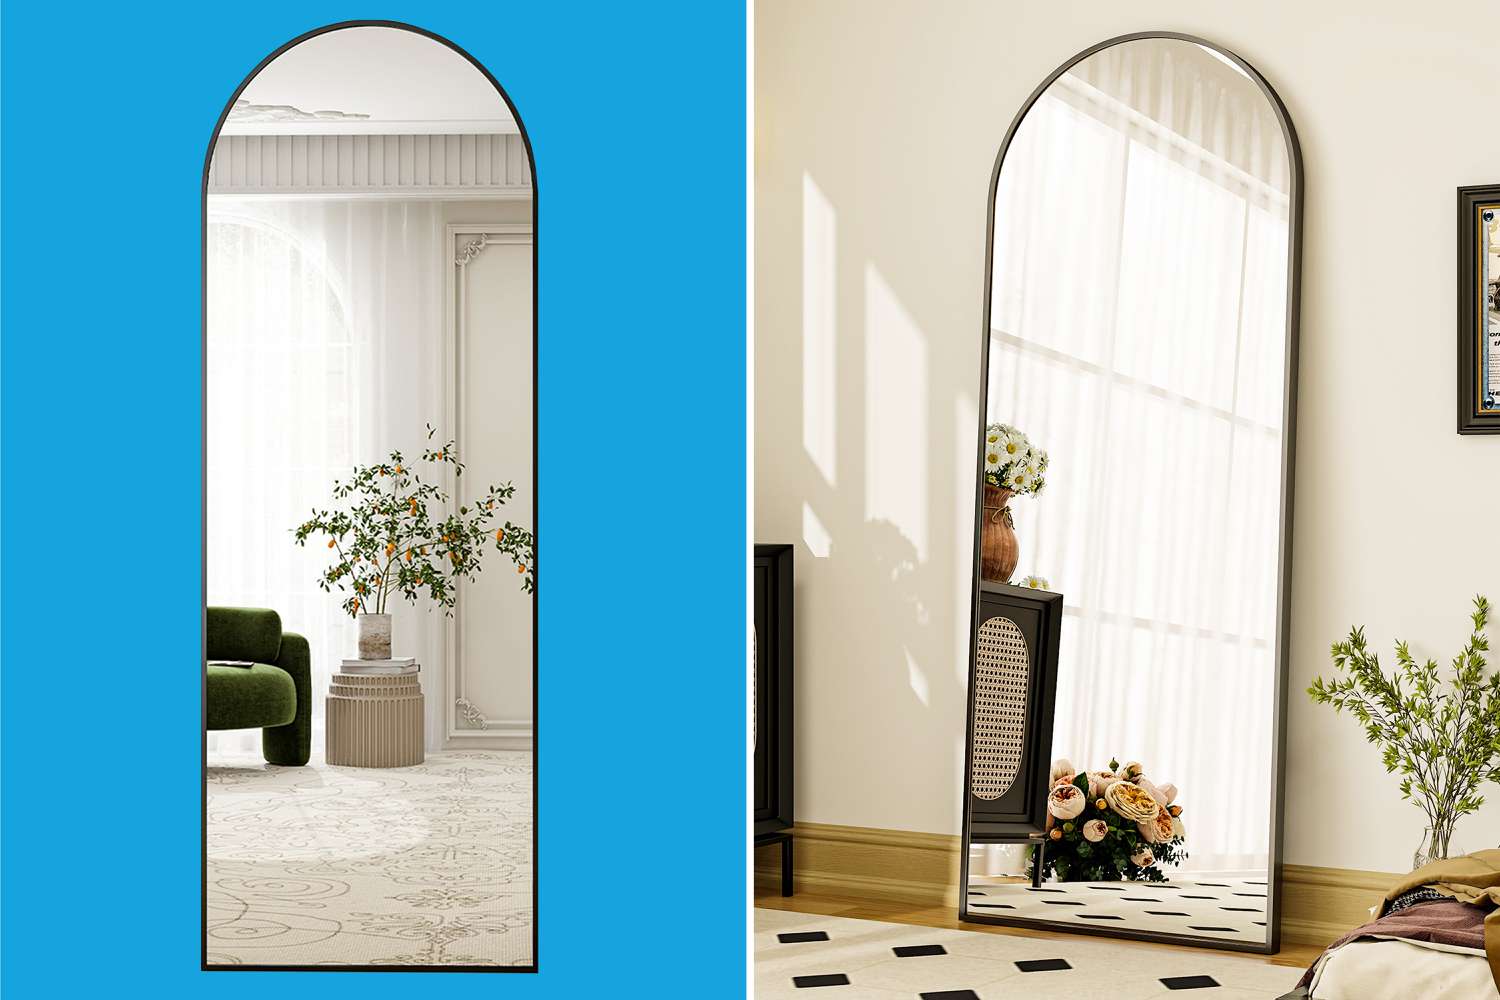 This Gorgeous Floor-Length Mirror at Walmart Is 70% Off Right Now [Video]